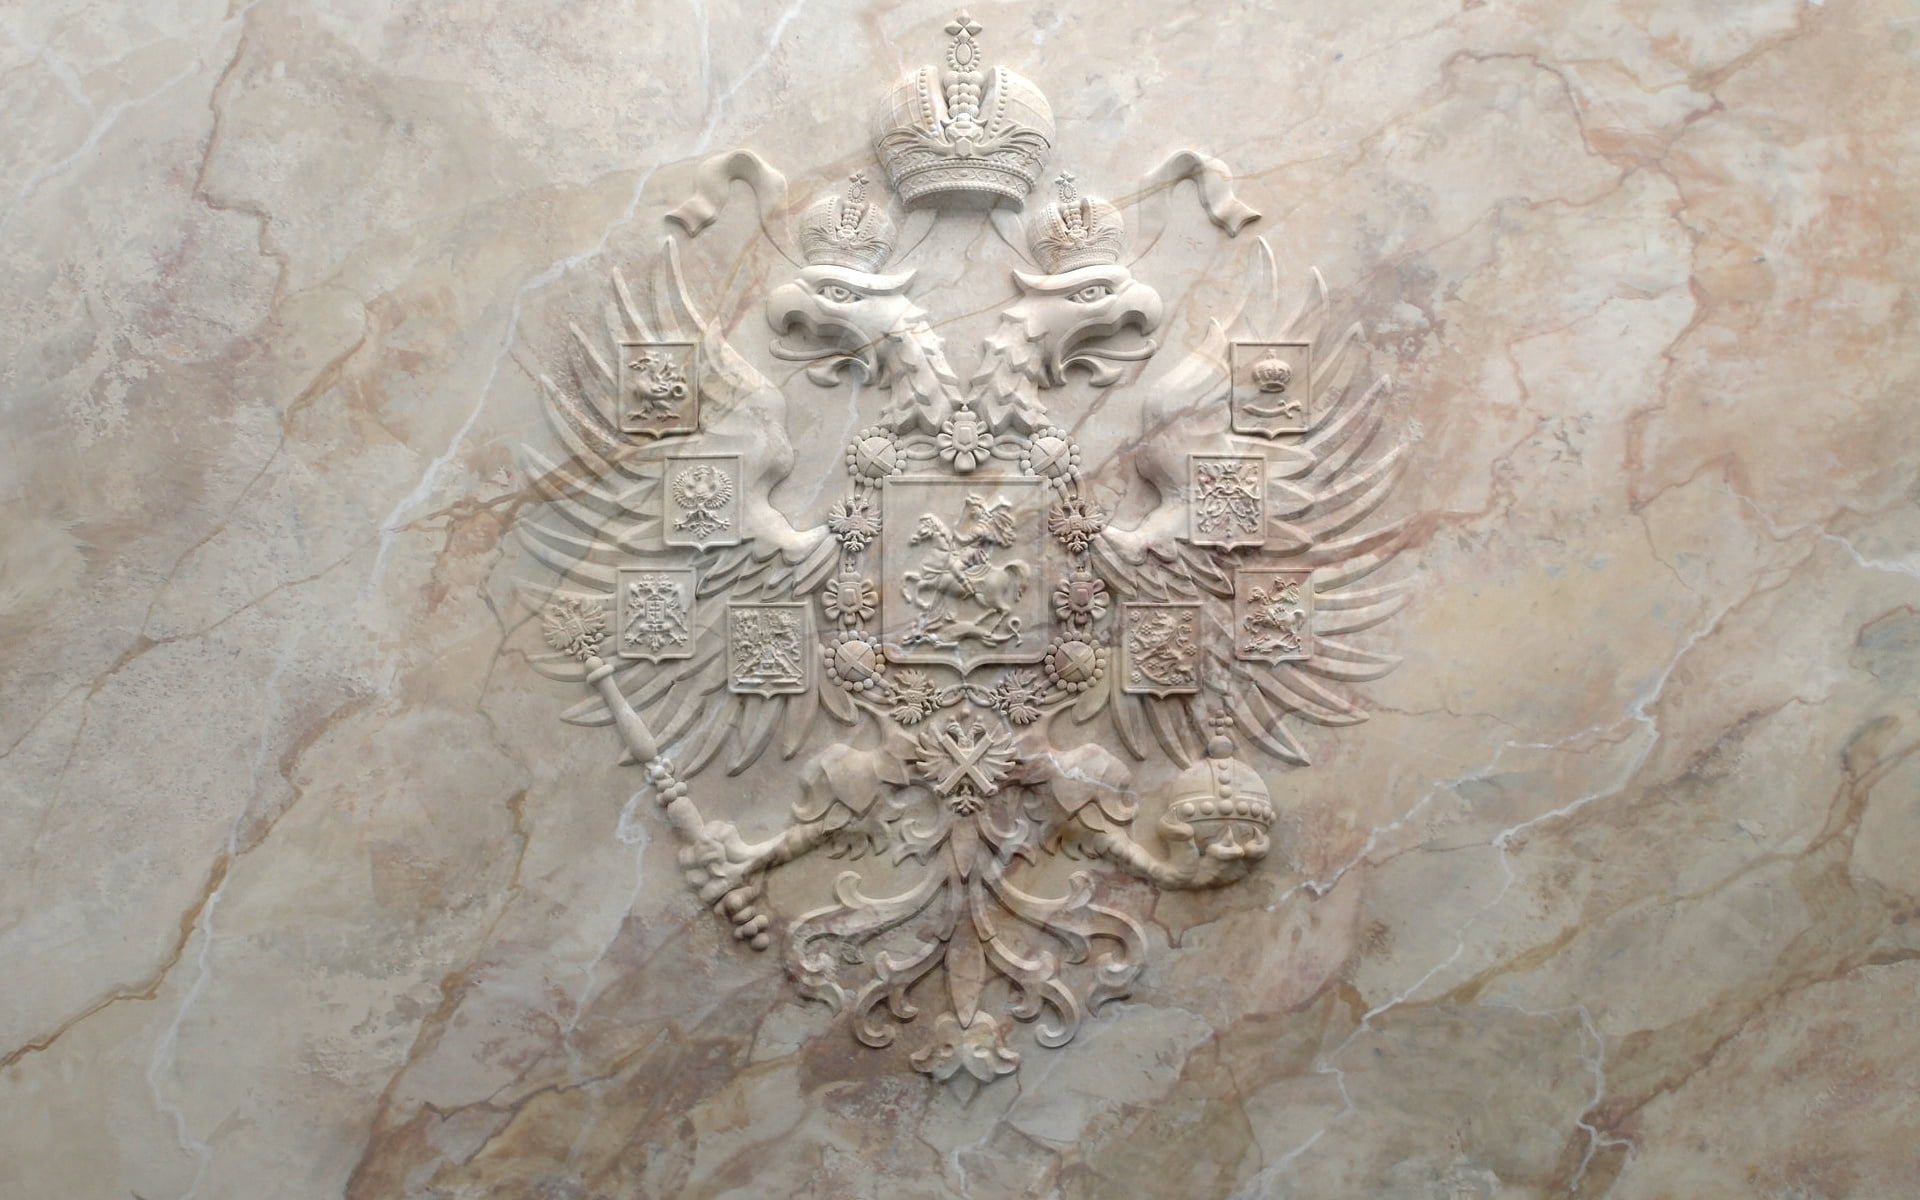 marble, Russia, coat of arms